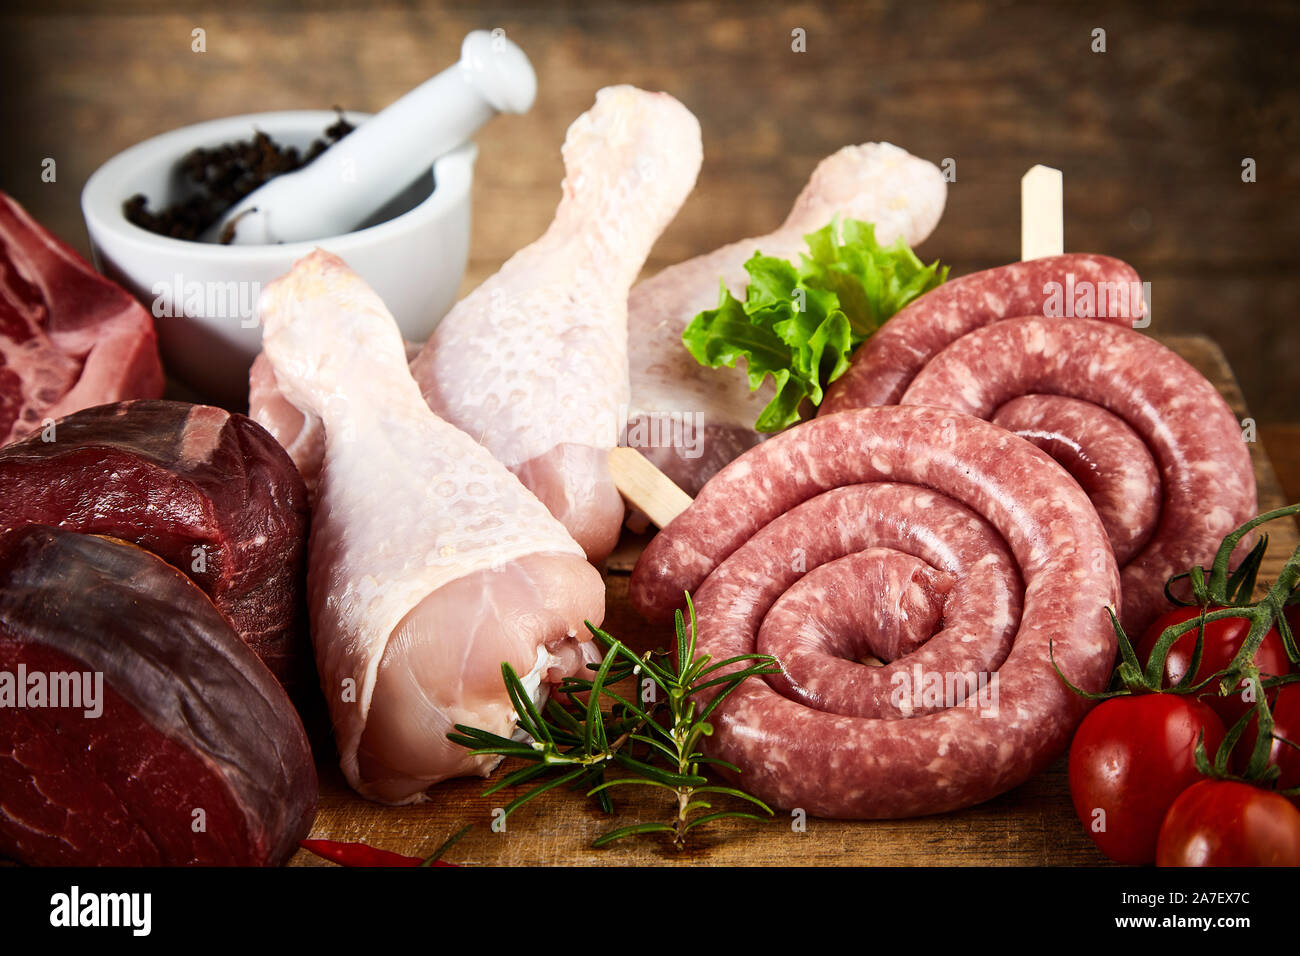 Rolled kringelwurst with raw chicken legs and beef steak displayed on a wooden kitchen table with fresh herbs and tomatoes in a close up view suitable Stock Photo